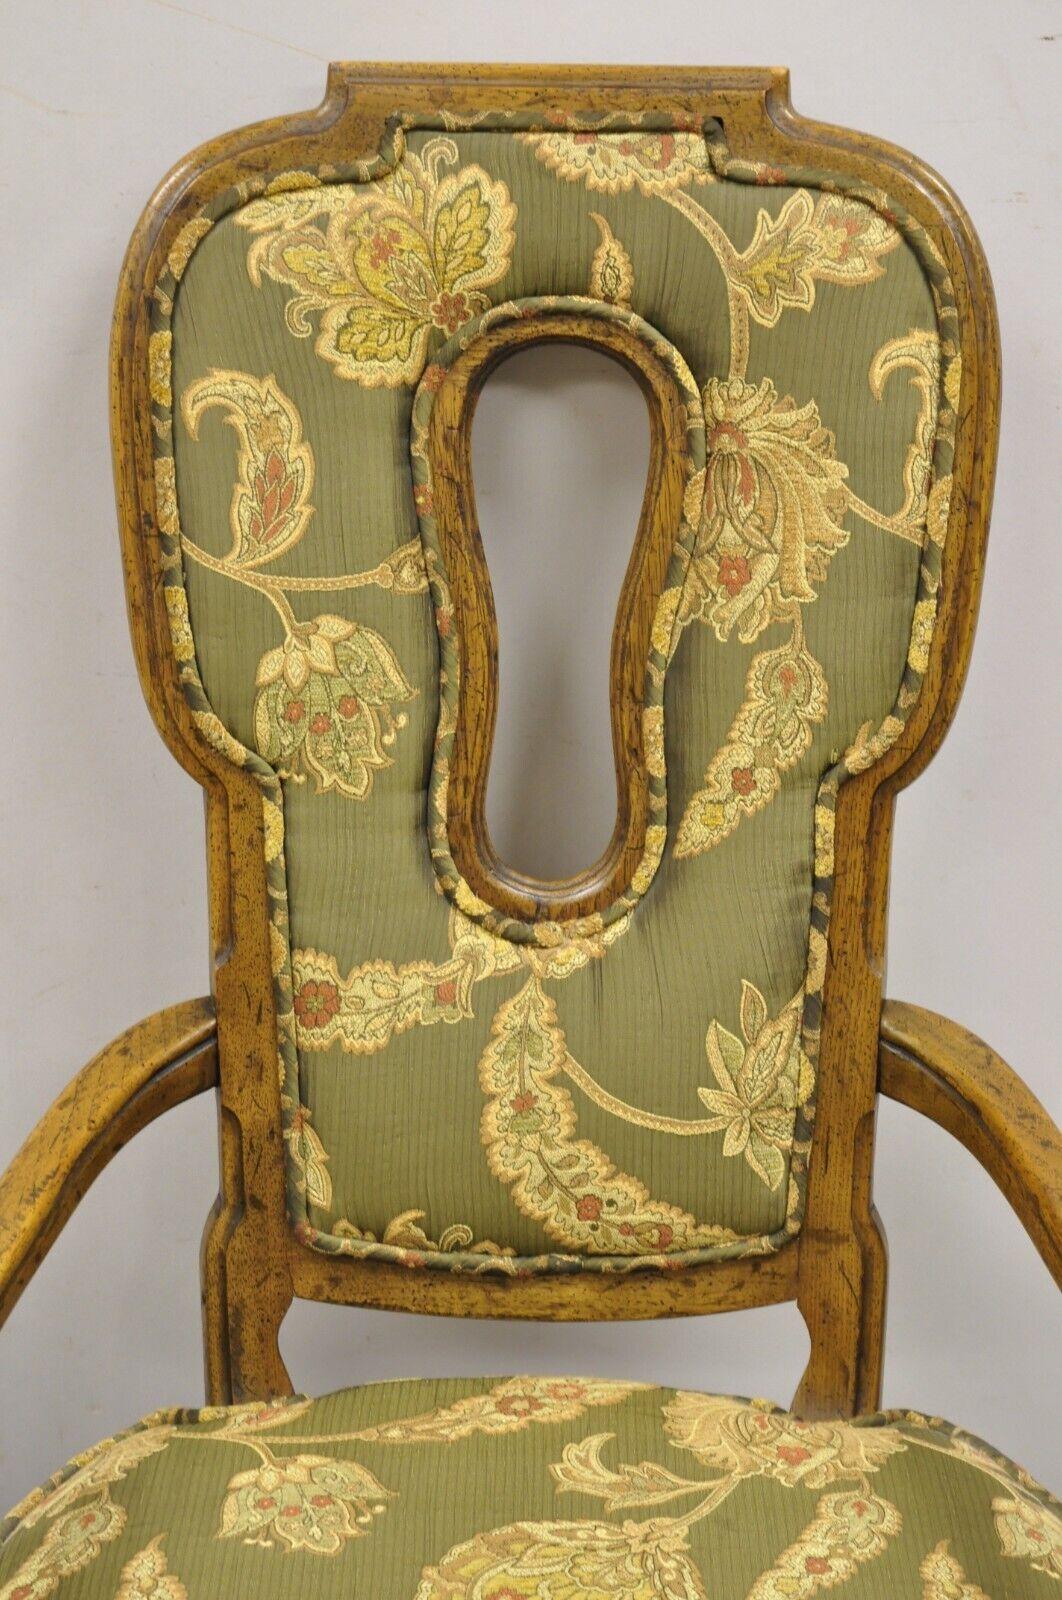 Vintage Hollywood Regency Keyhole Back Fireside Lounge Arm Chairs - a Pair For Sale 5